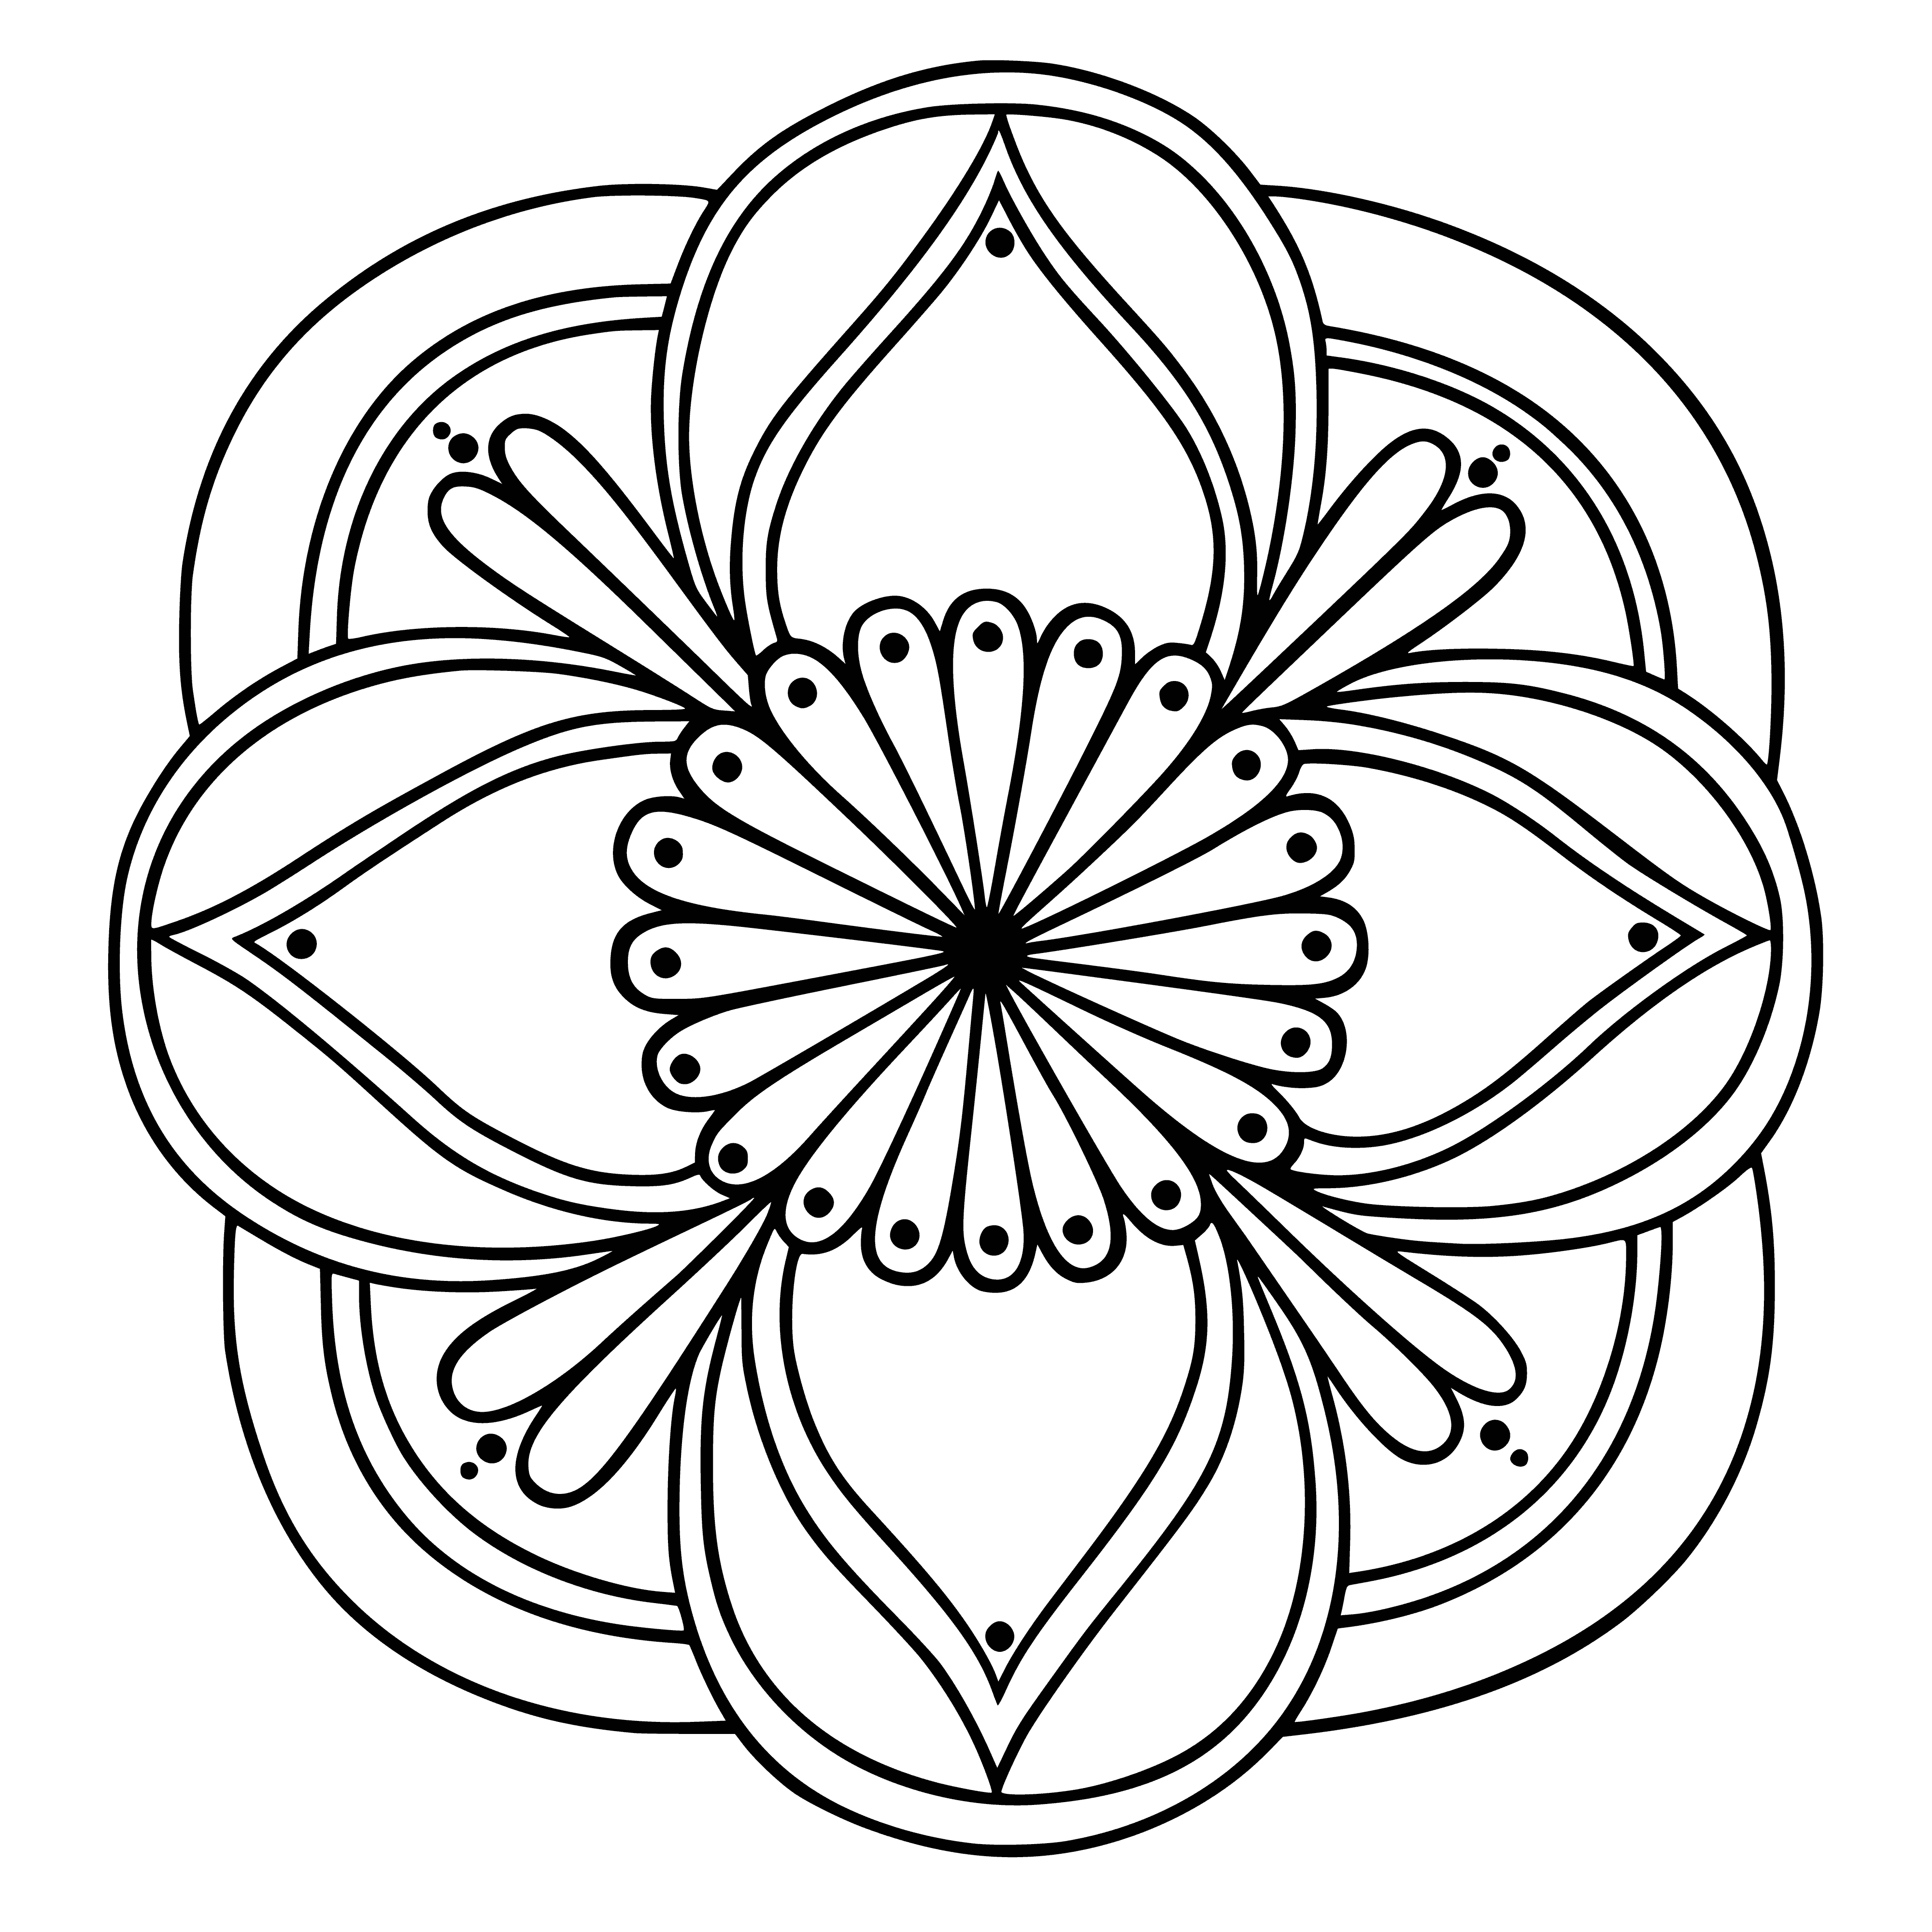 coloring page: Create intricate designs, relax & meditate with a coloring mandala. Learn the sacred meaning of circles and shapes in Hinduism & Buddhism.